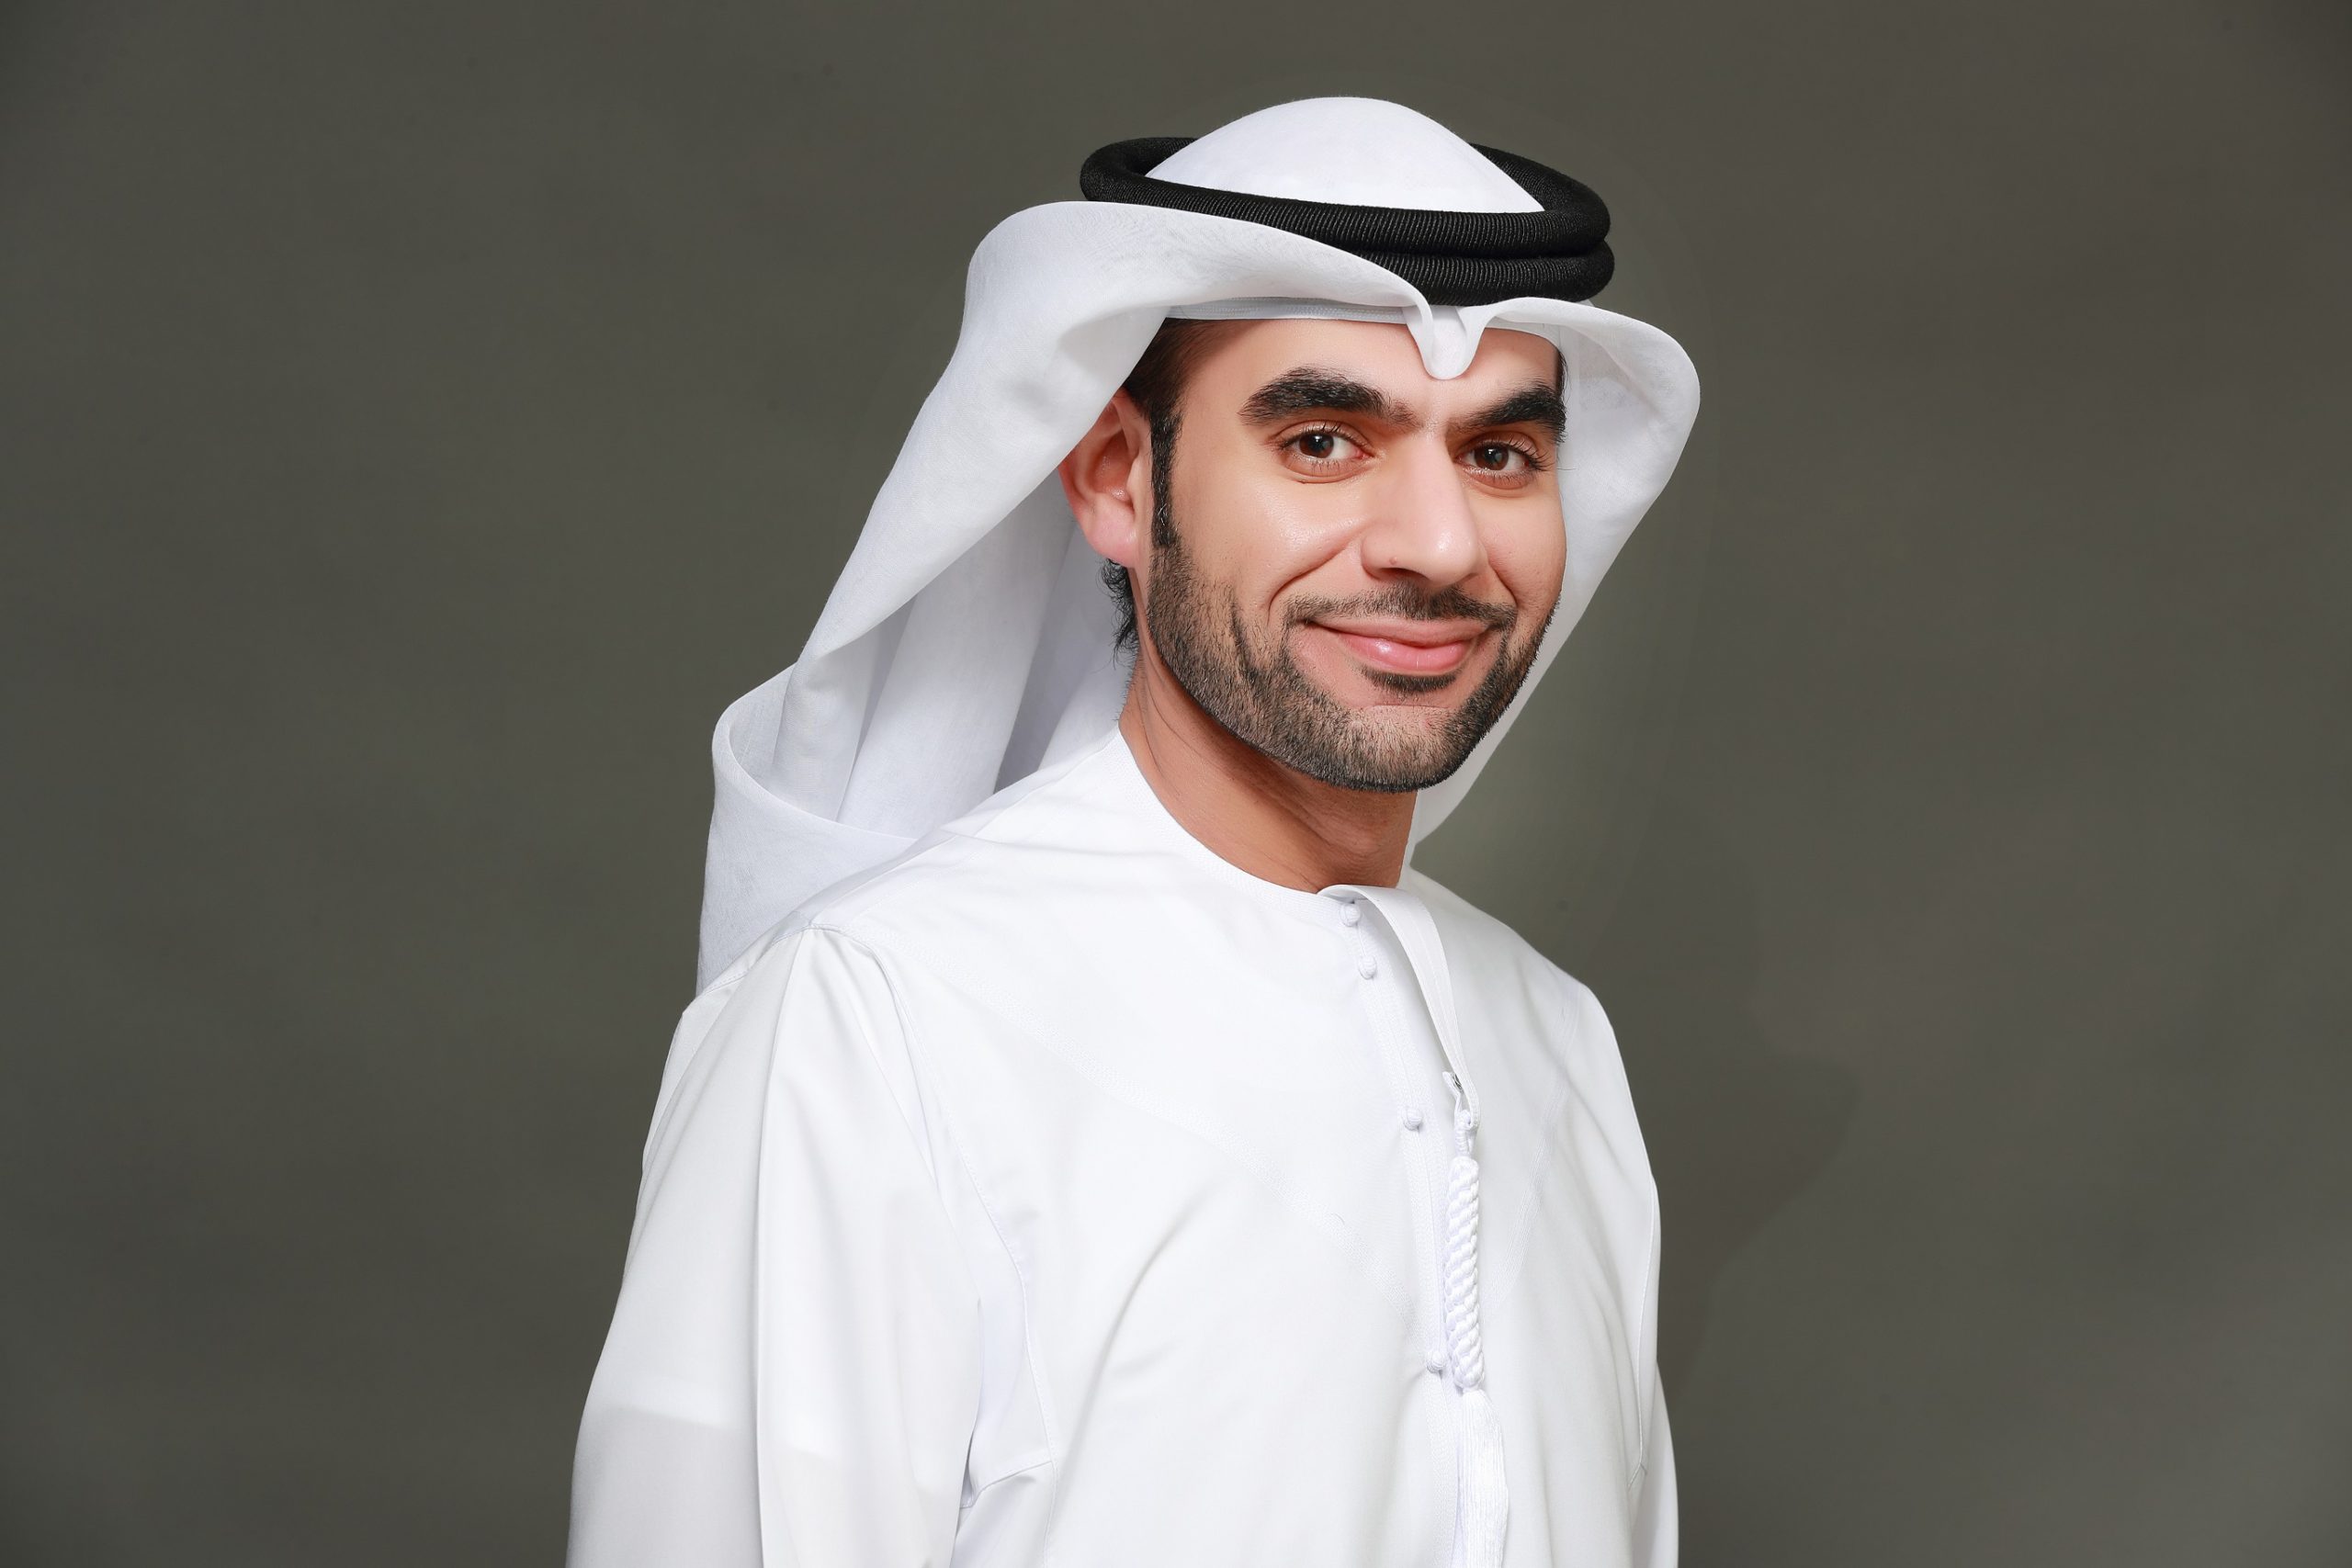 Image for GITEX Technology Week 2020: Smart Dubai Launches ‘Leadership Dashboard for Government Resources’ to Support Data-Backed Decision Making